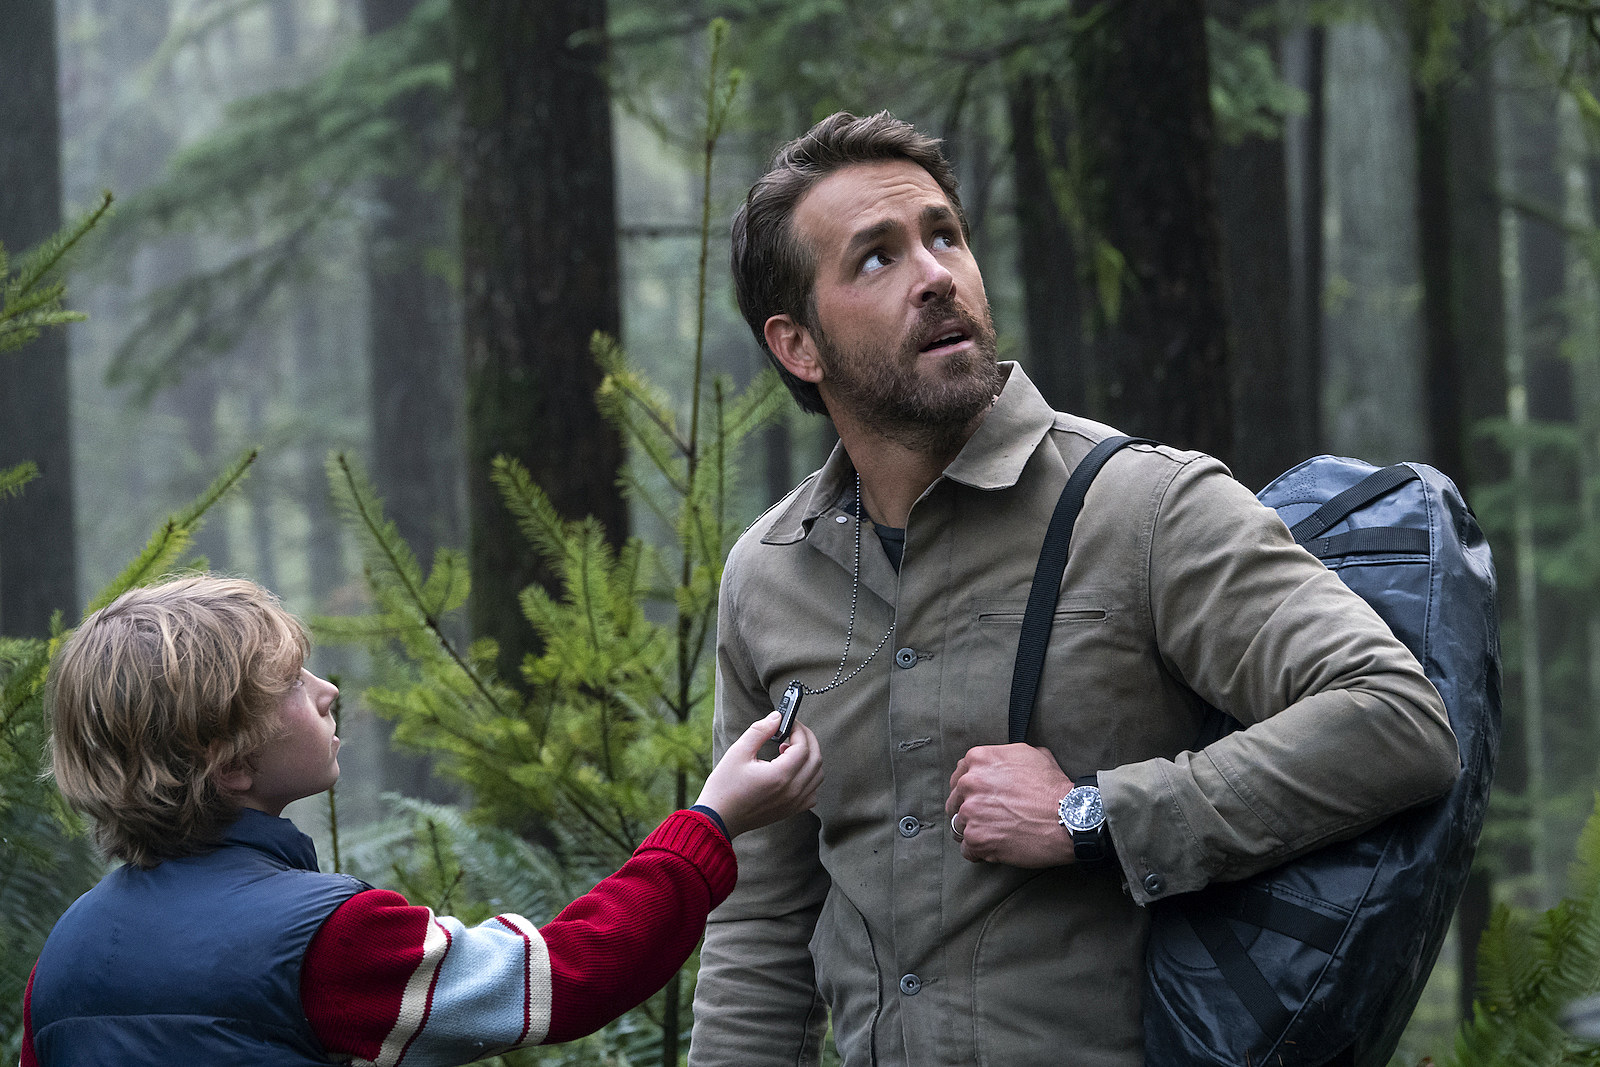 Why Ryan Reynolds Netflix Movies Are So Popular (Even If They're Bad)